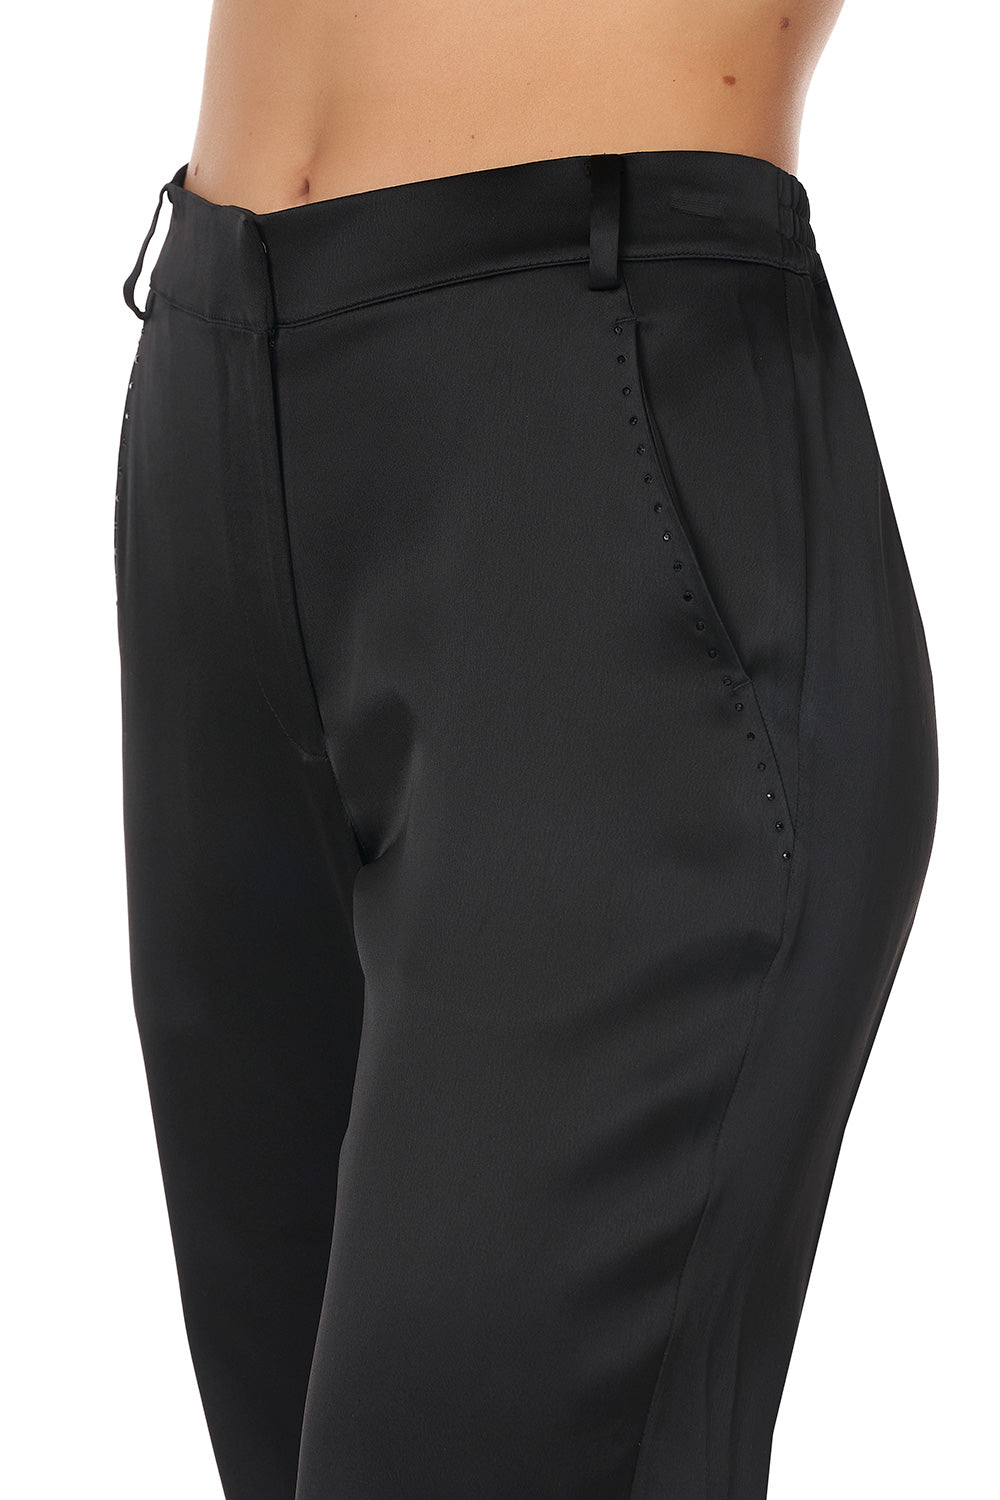 JOGGER WITH ENCASED ELASTIC CUFF SOLID BLACK